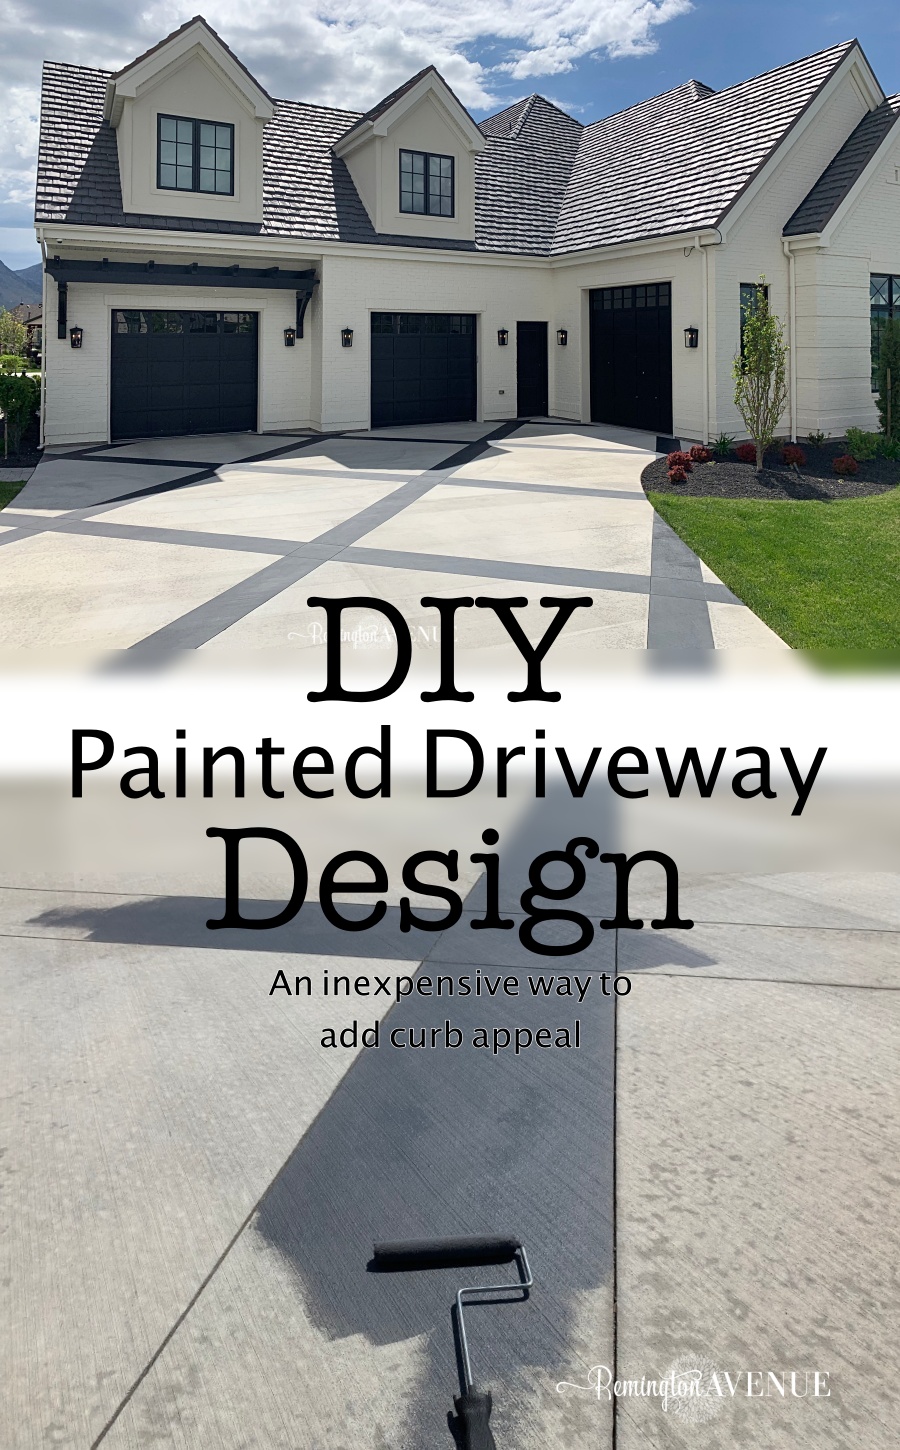 Adding curb appeal with a painted driveway